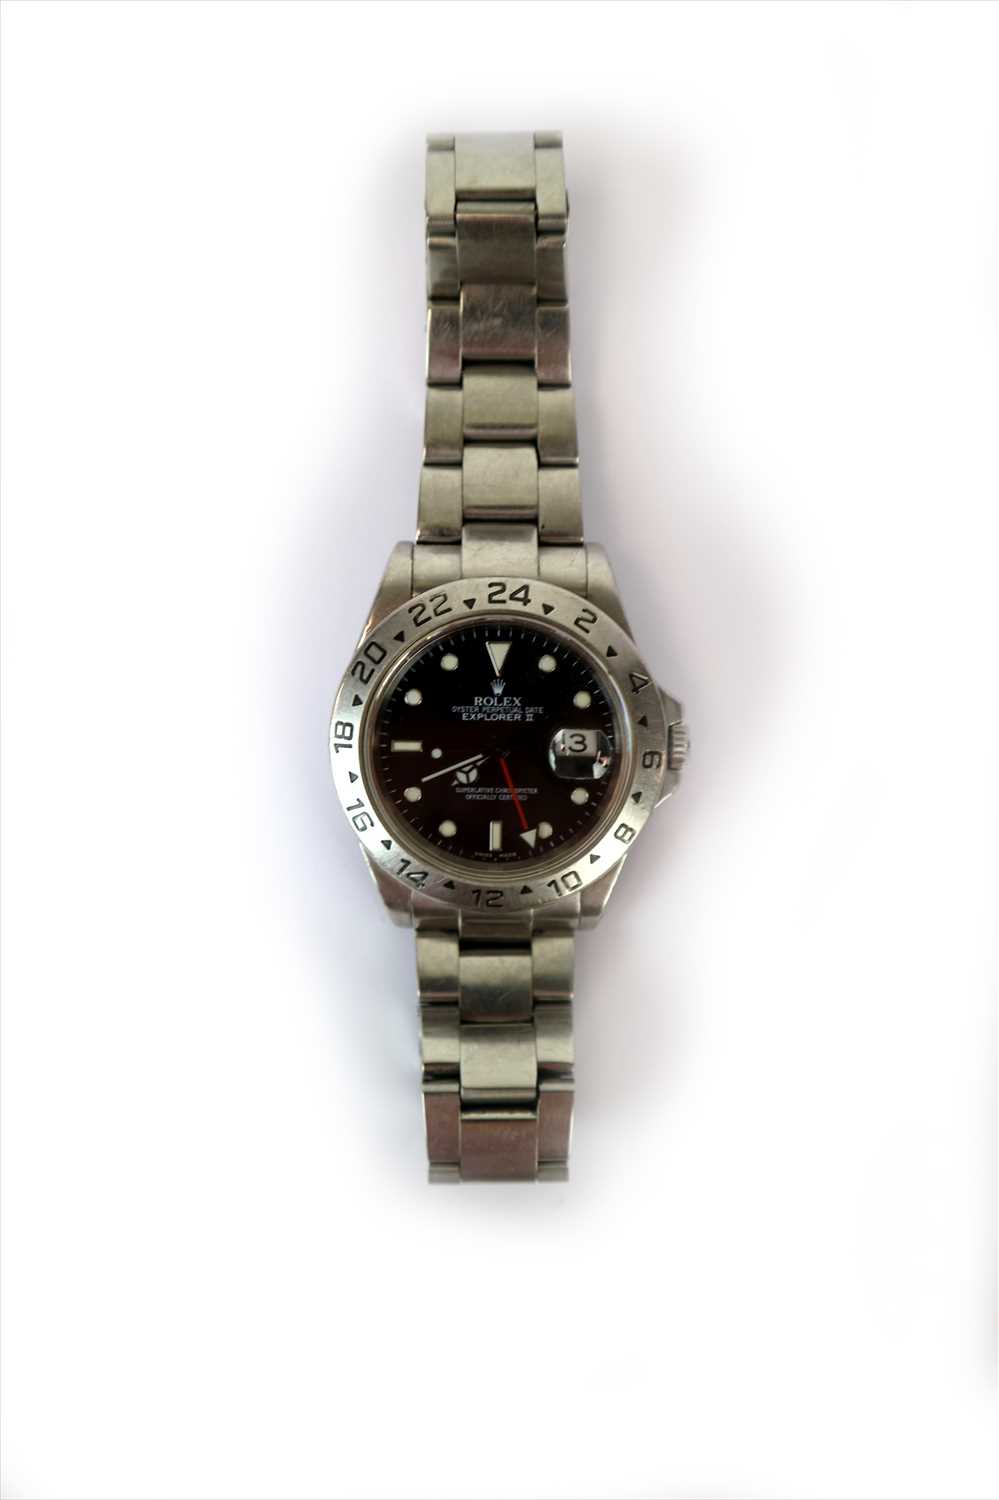 Manufacturer: Rolex Model Name: Explorer II Year: 2004 Case No: 16750 Case Material: Stainless (